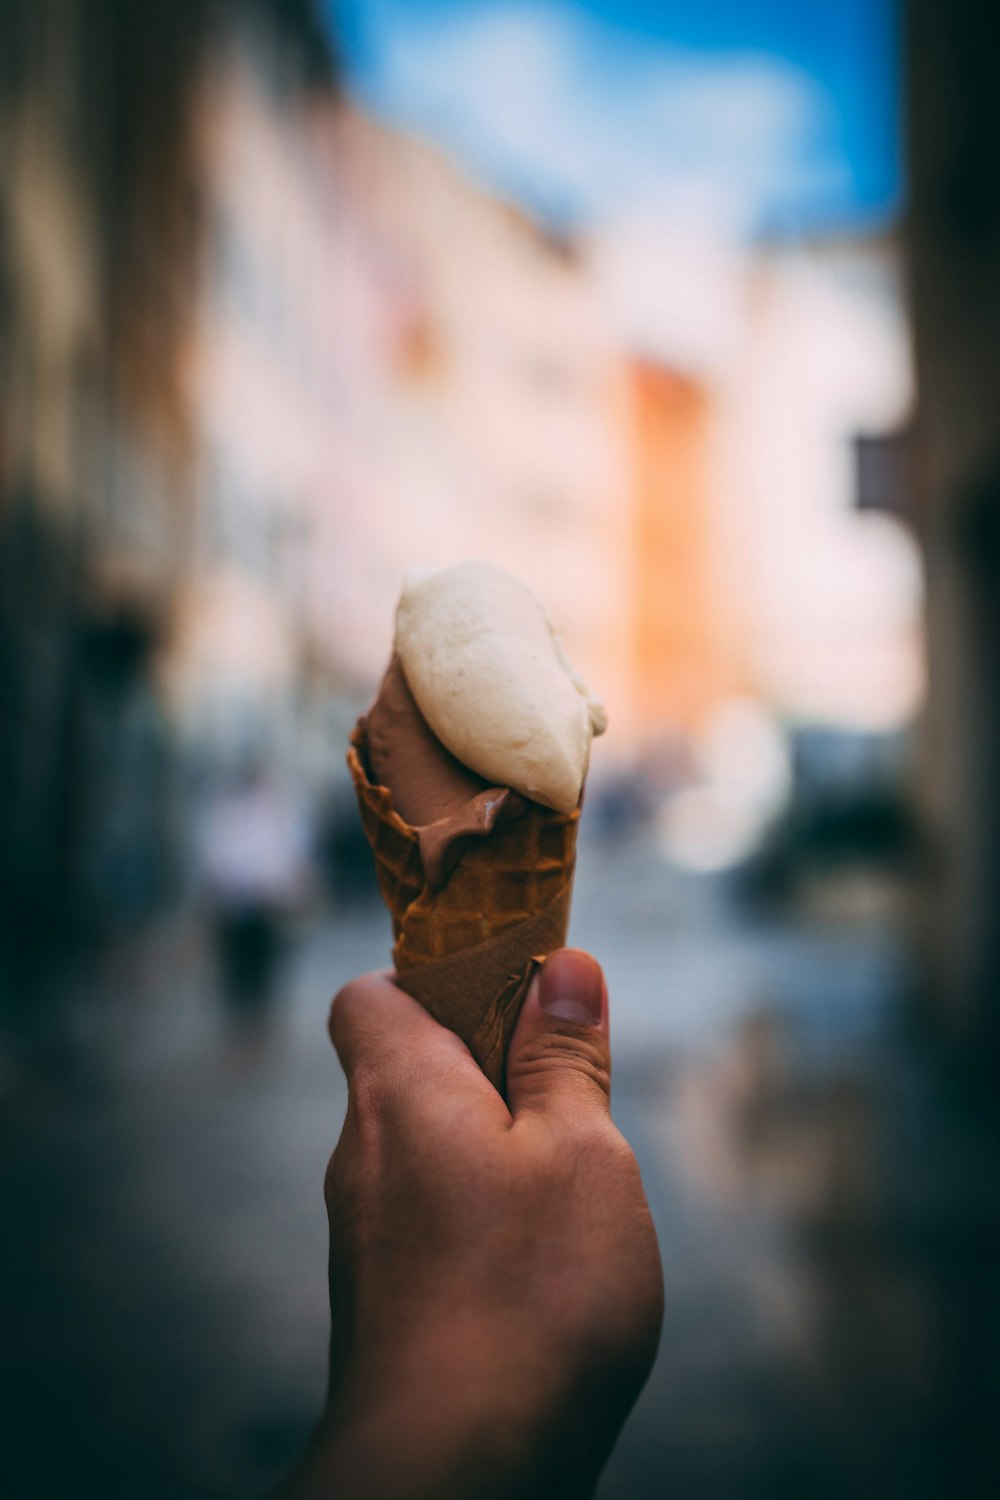 a hand holding an ice cream cone on a city street